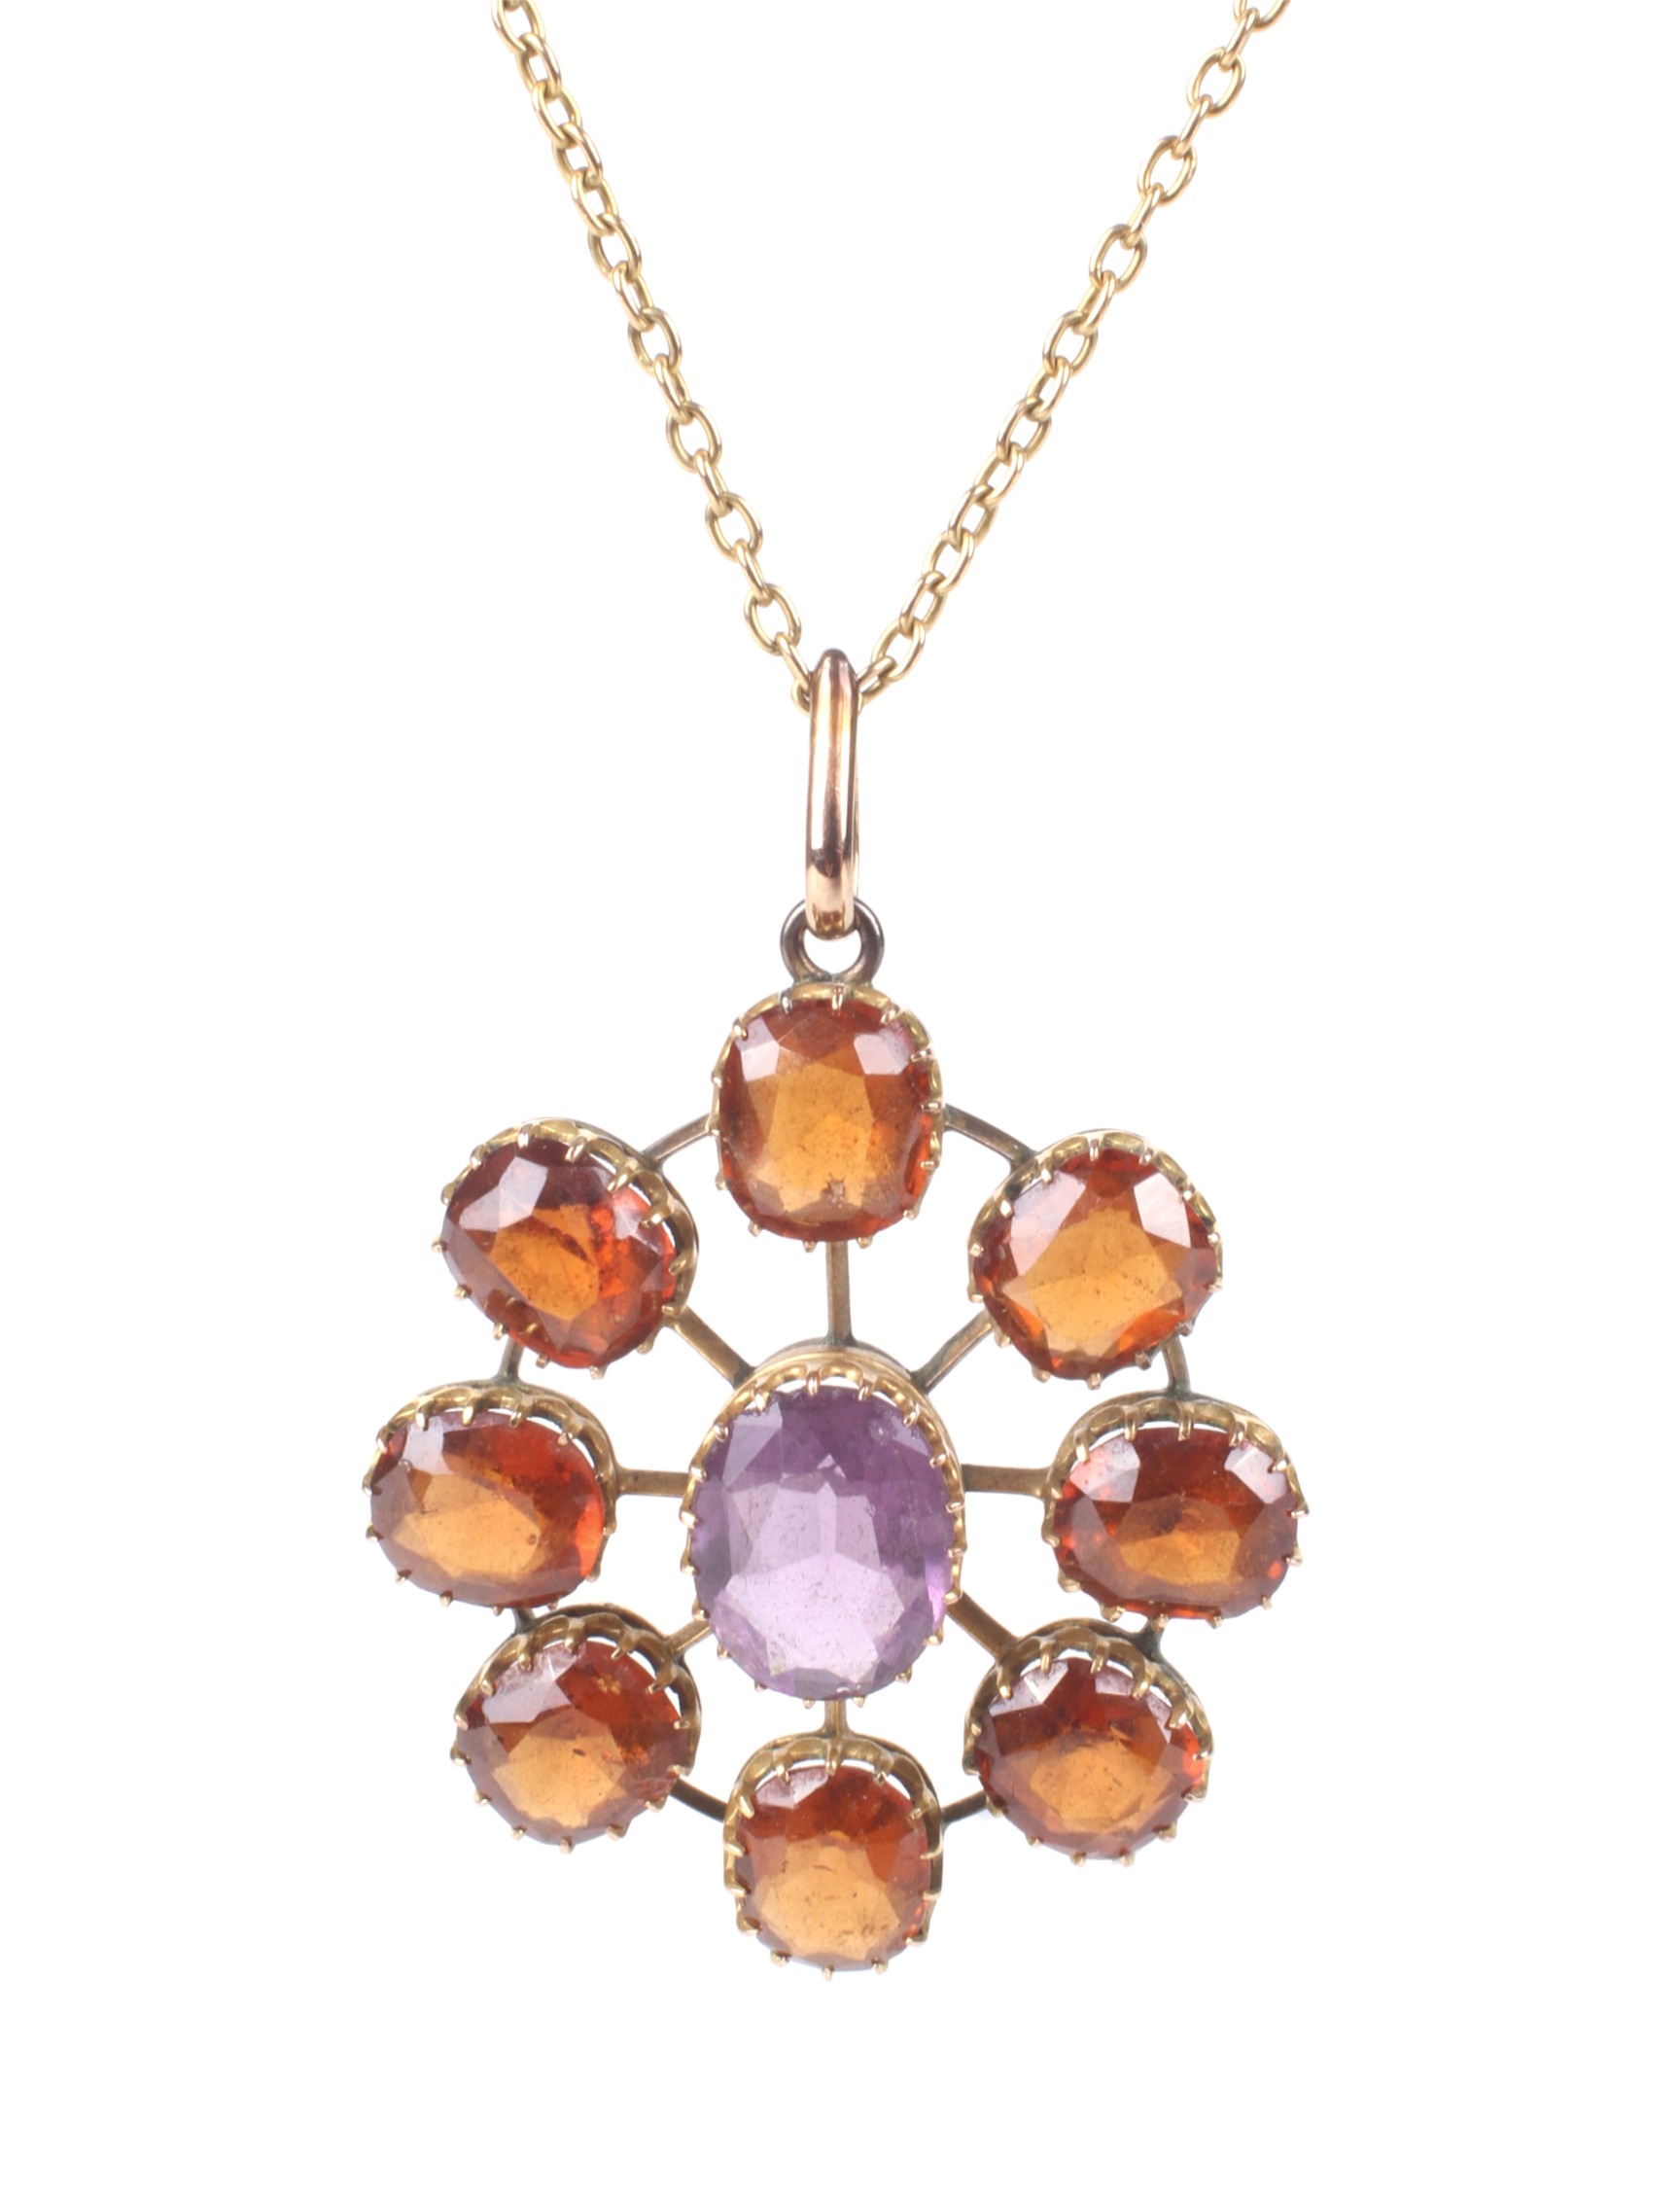 An early 20th century hessonite garnet and violet paste star-shaped cluster pendant and a chain.